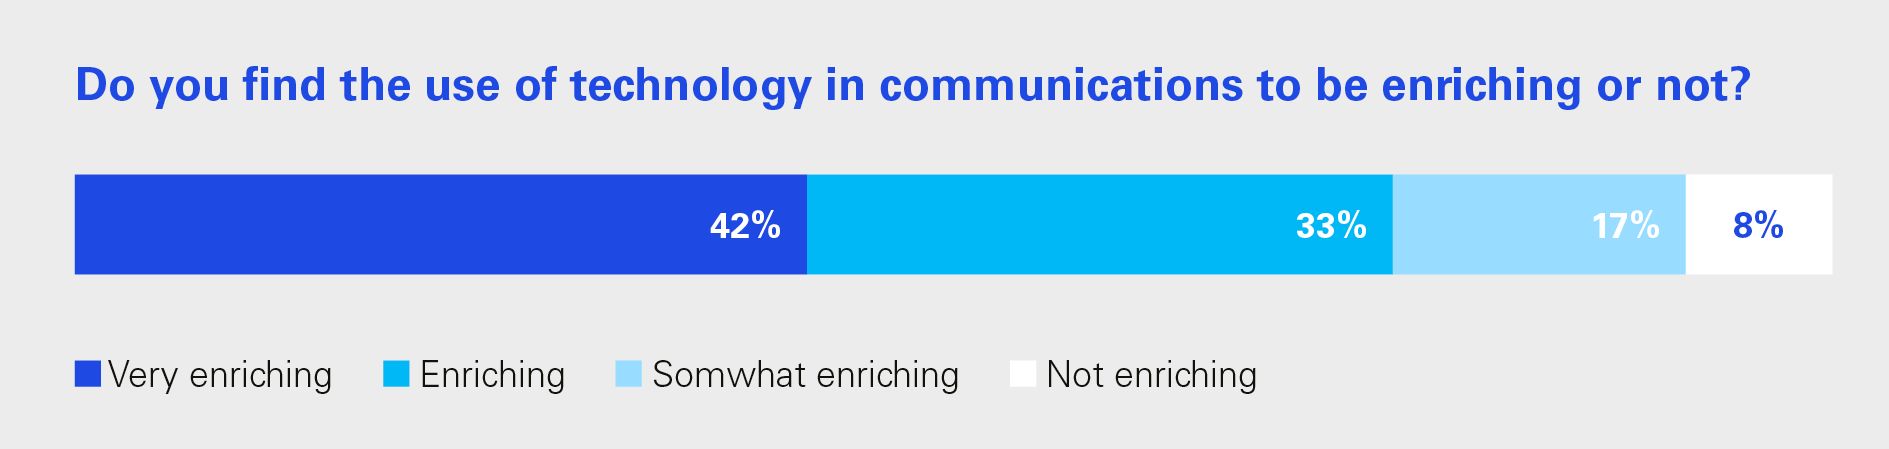 Do you find the use of technology in communications to be enriching or not?